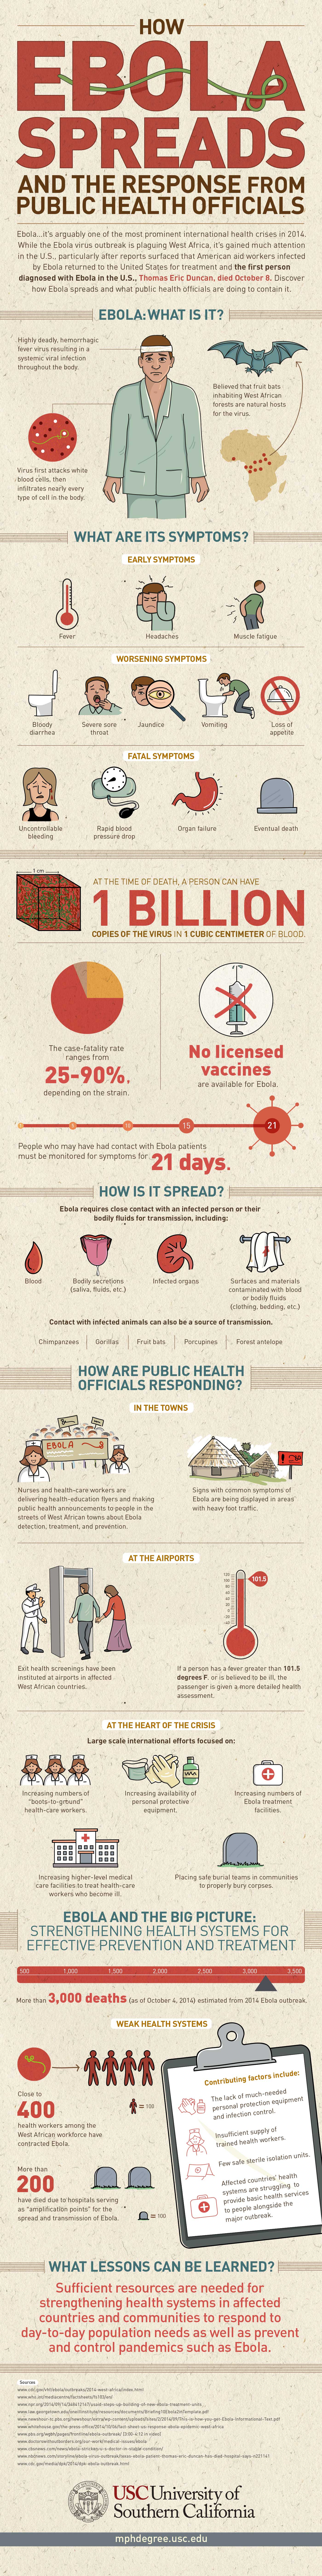 HOW EBOLA SPREADS | INFOGRAPHIC